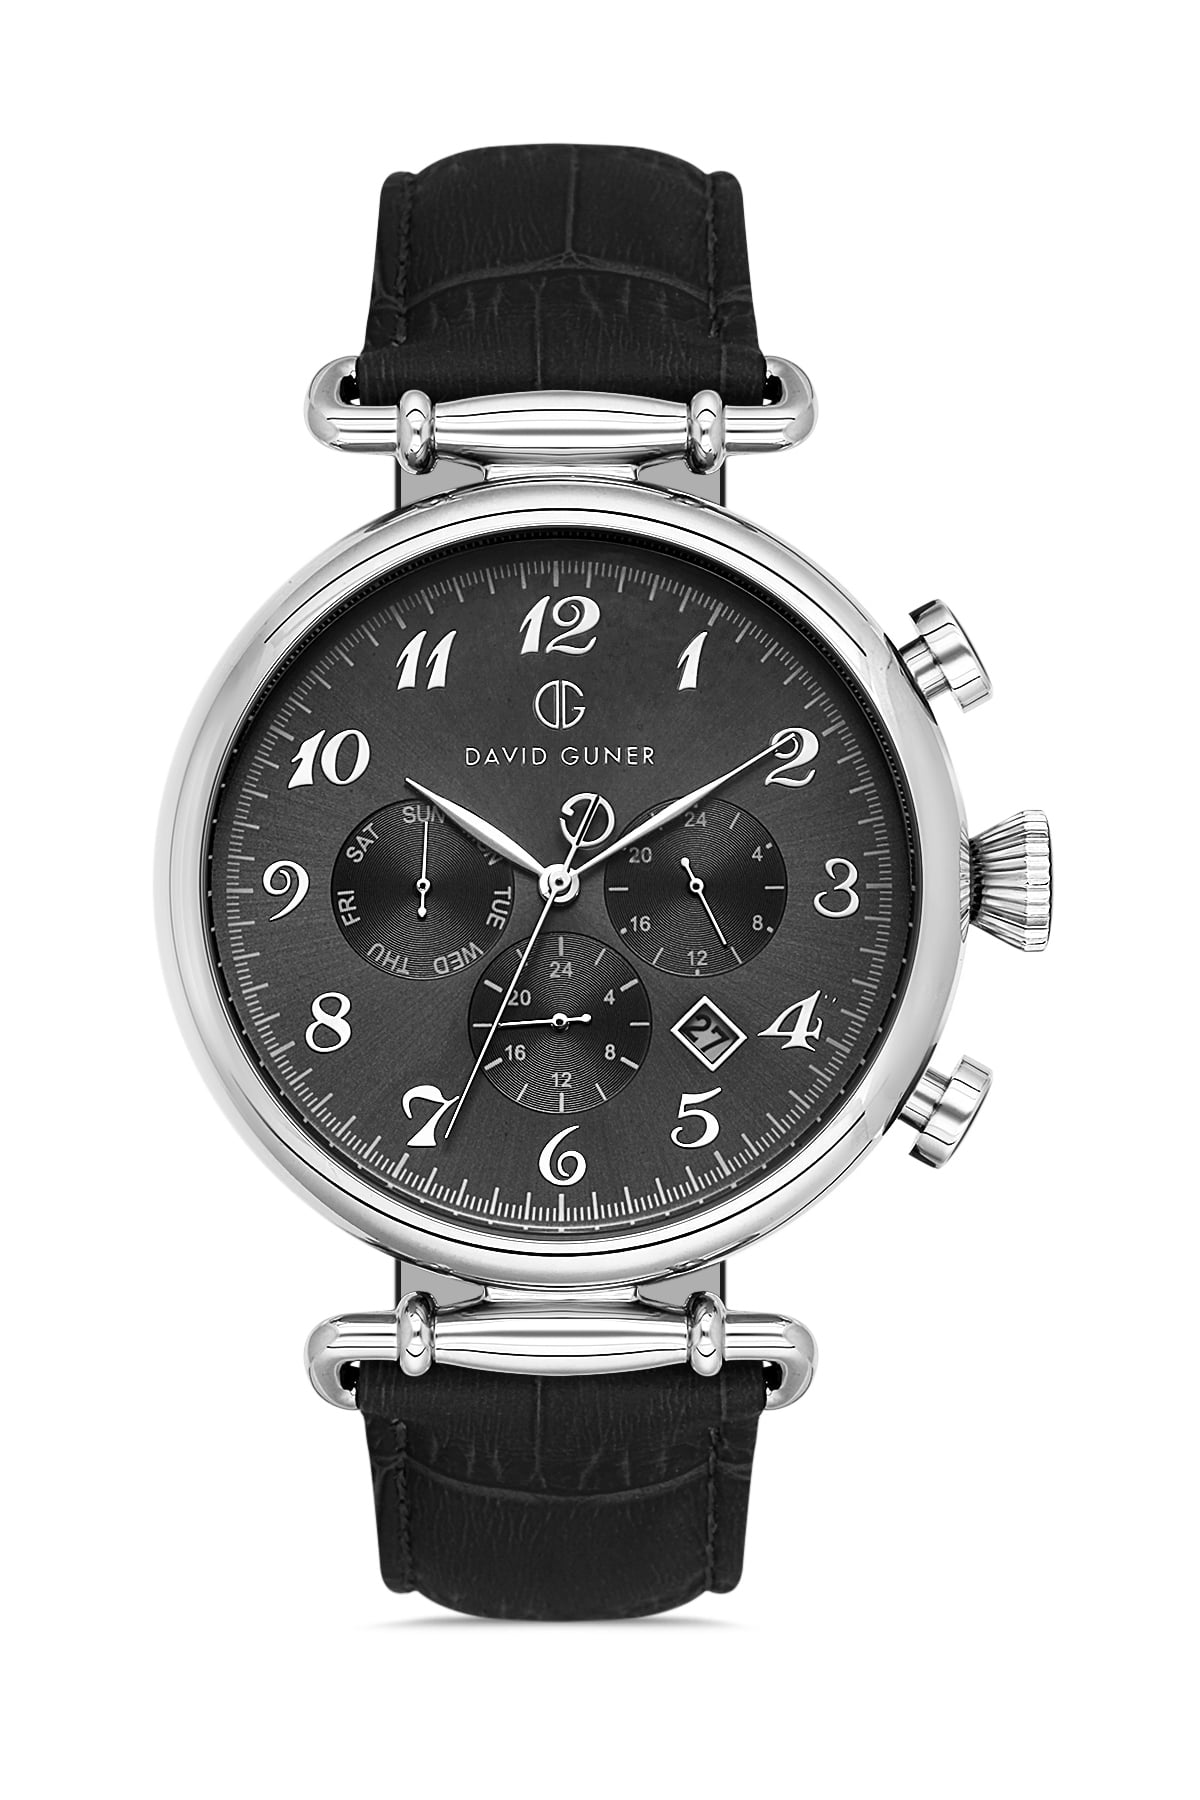 DAVID GUNER Men's Watch with Black Dial and Black Leather Strap